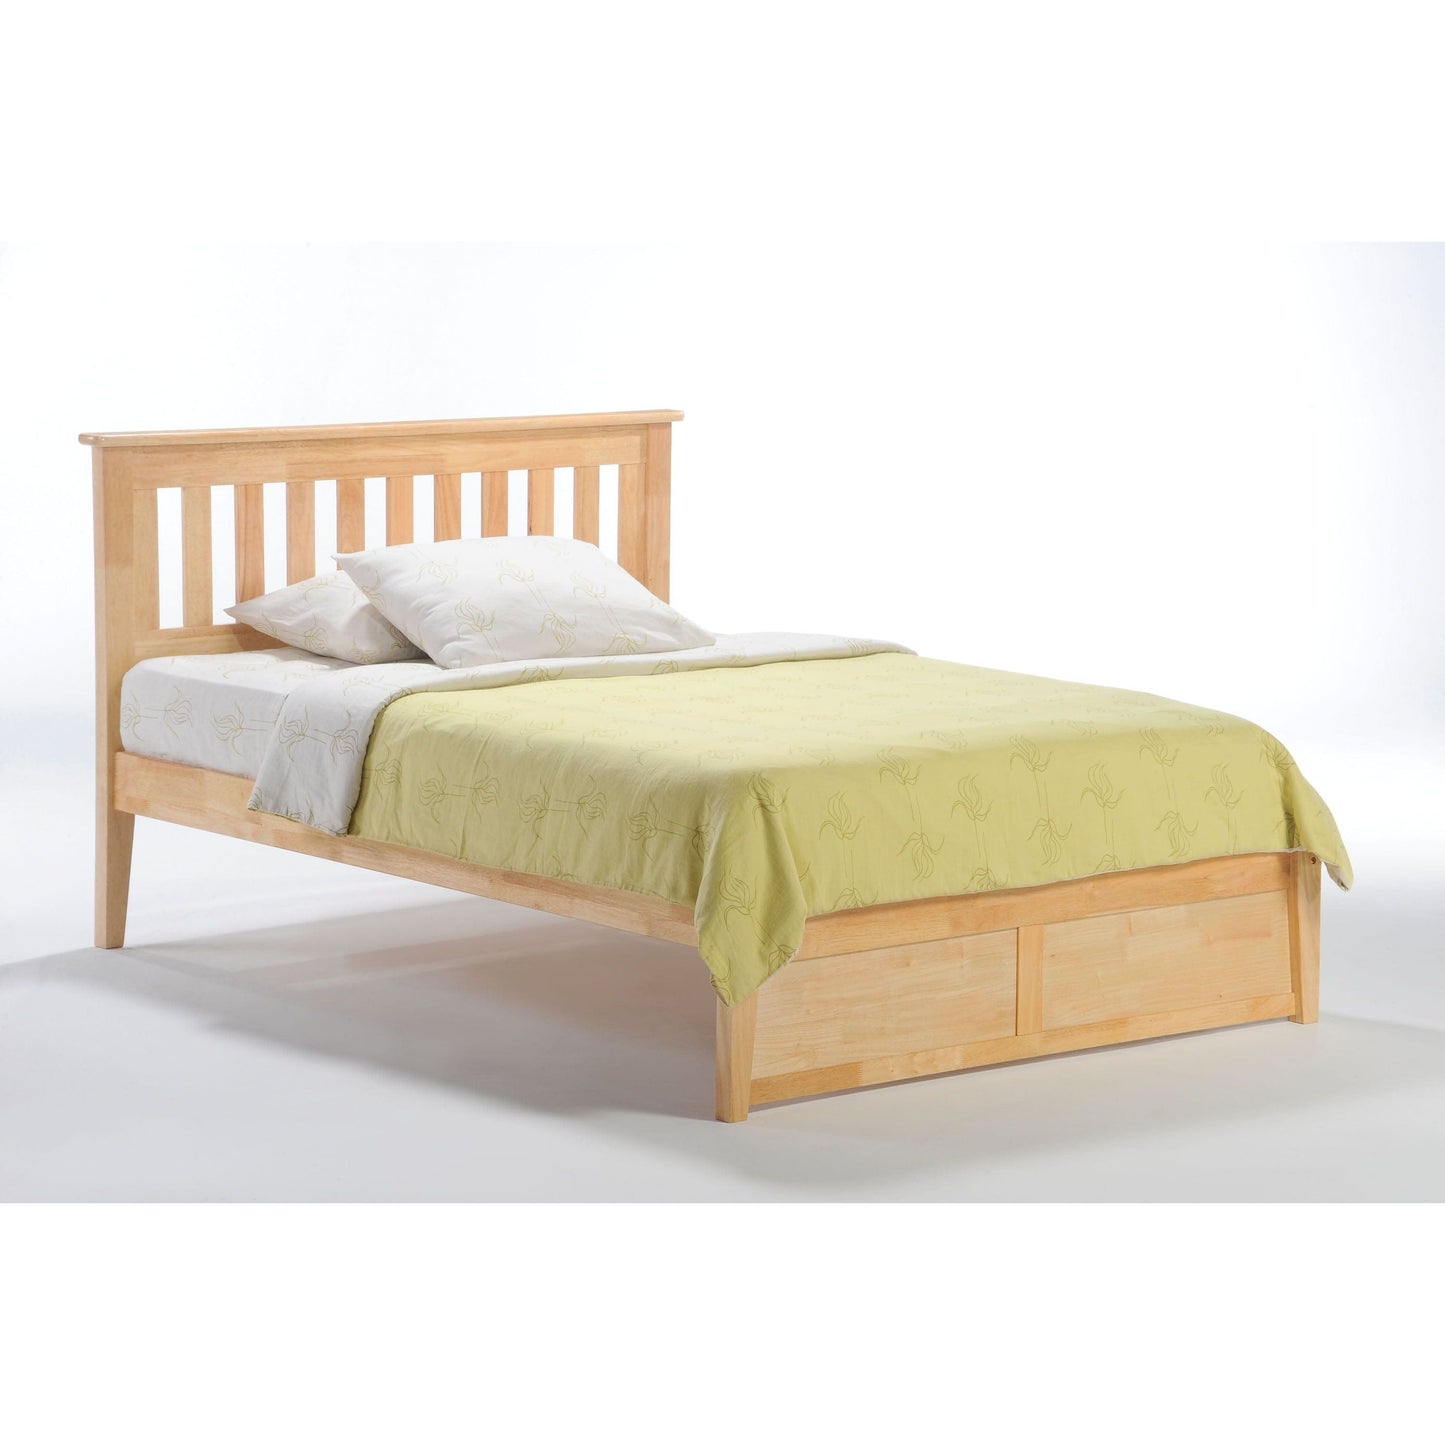 Night And Day Queen Rosemary Bed (P Series) in cherry finish Natural RMY-PH-QEN-NA-COM